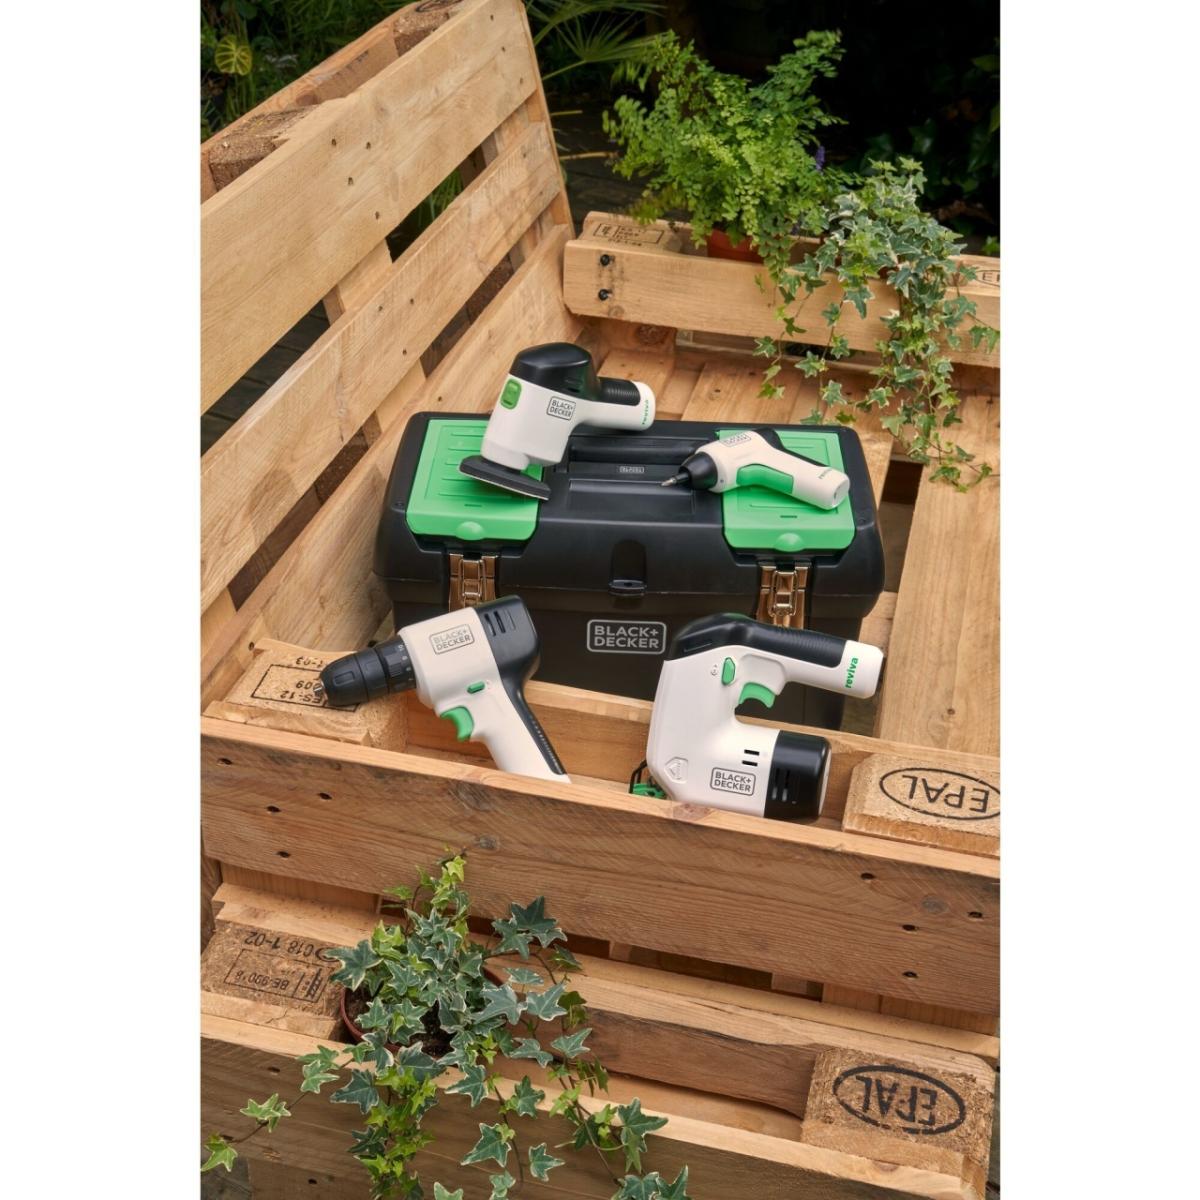 Wooden pallets stacked, white, black and green colored tools laying on top along with a carrying case.